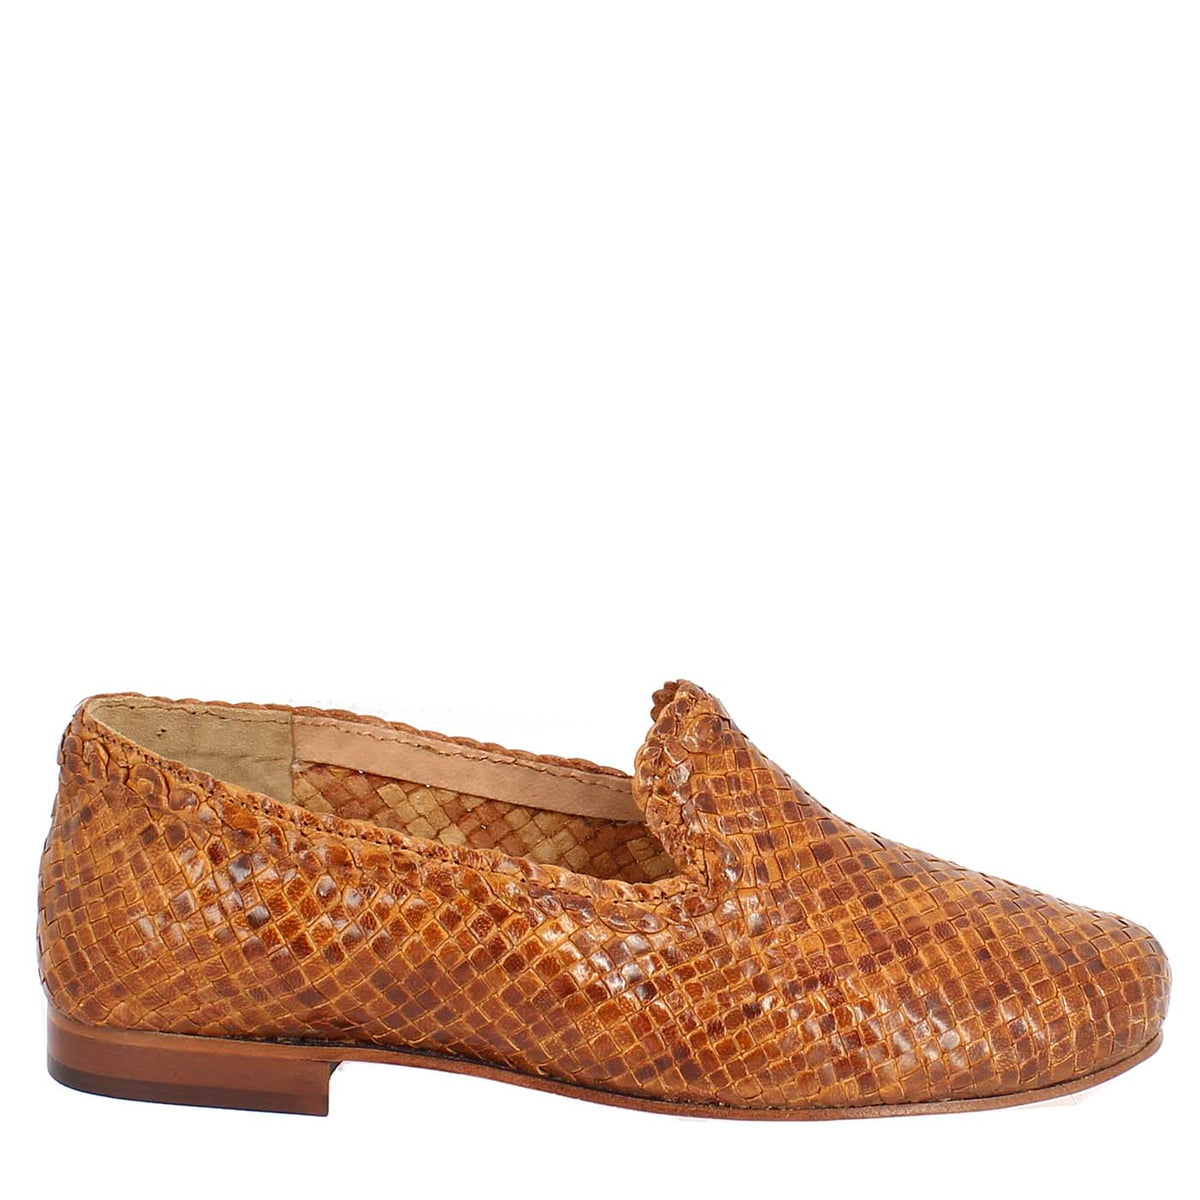 Women's loafers in brown woven leather